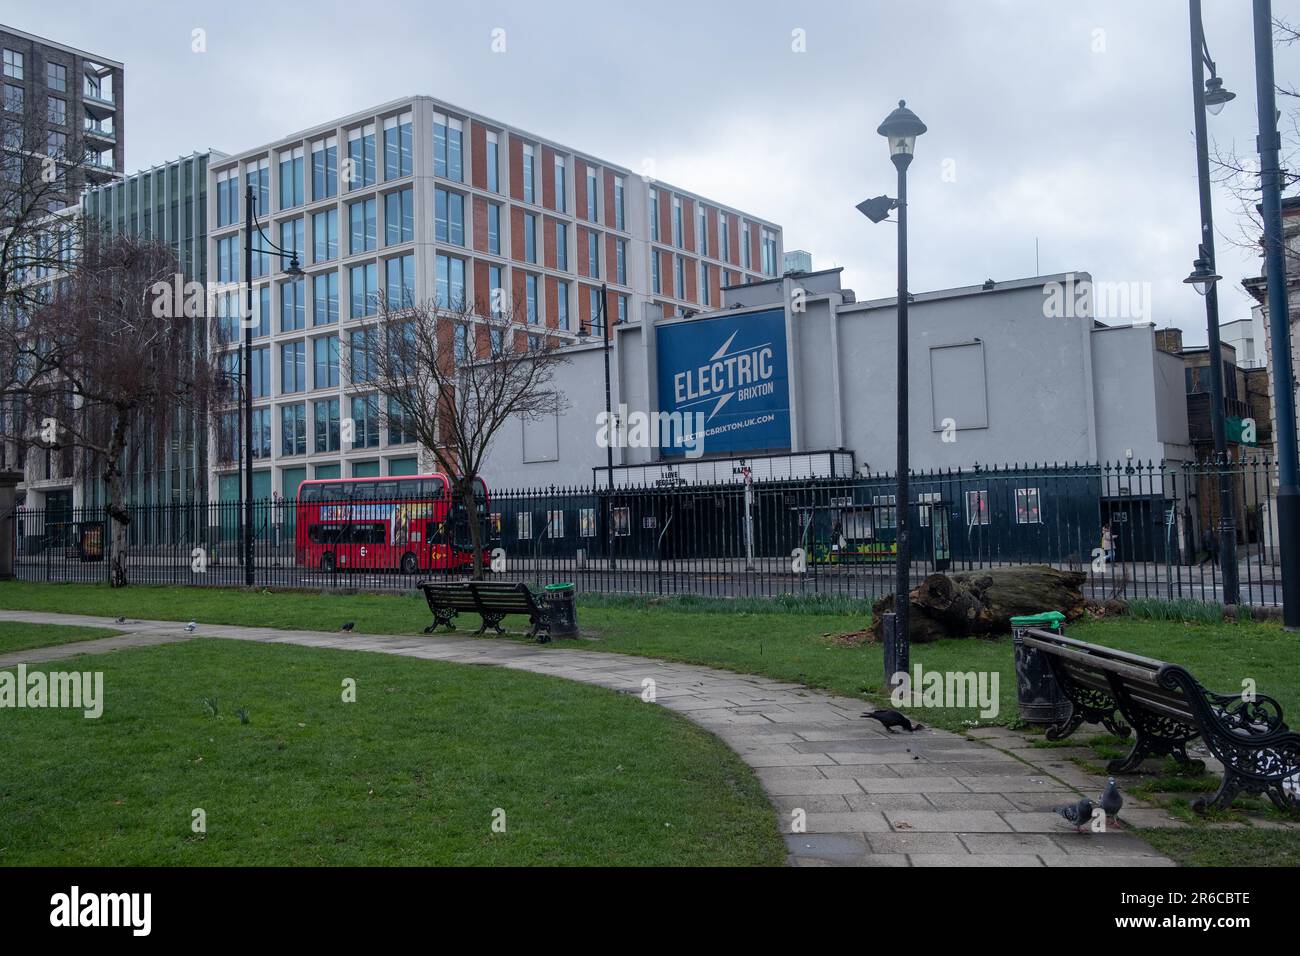 LONDON, MARCH 2023: Electric Brixton, a landmark music venue  in south west London hosting international dj's and clubnights Stock Photo